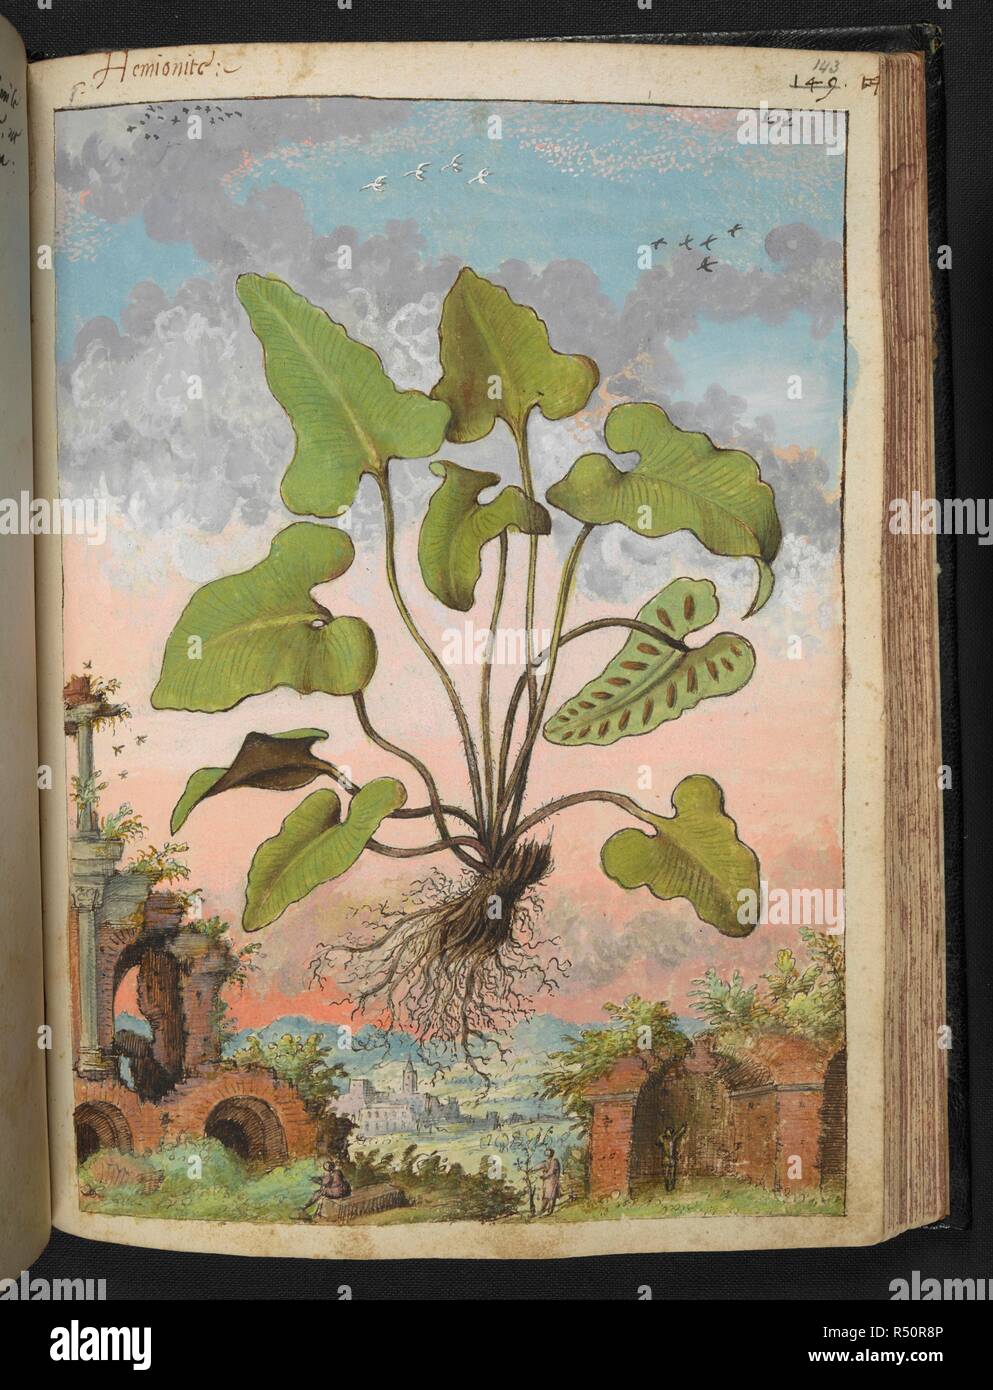 Full page botanical drawing of Phyllitis hemionitis, labelled 'Hemionite' (a type of fern) with ruins in the background, a man tending a tree and a man sitting on a fallen column. Coloured drawings of plants, copied from nature in the Roman States, by Gerardo Cibo. Vol. I. Pietro Andrea Mattioli, Physician, of Siena: Extracts from his edition of Dioscorides' 'de re Medica':. Italy, c. 1564-1584. Source: Add. 22332 f.143. Language: Italian. Author: Cibo, Gheraldo. Stock Photo